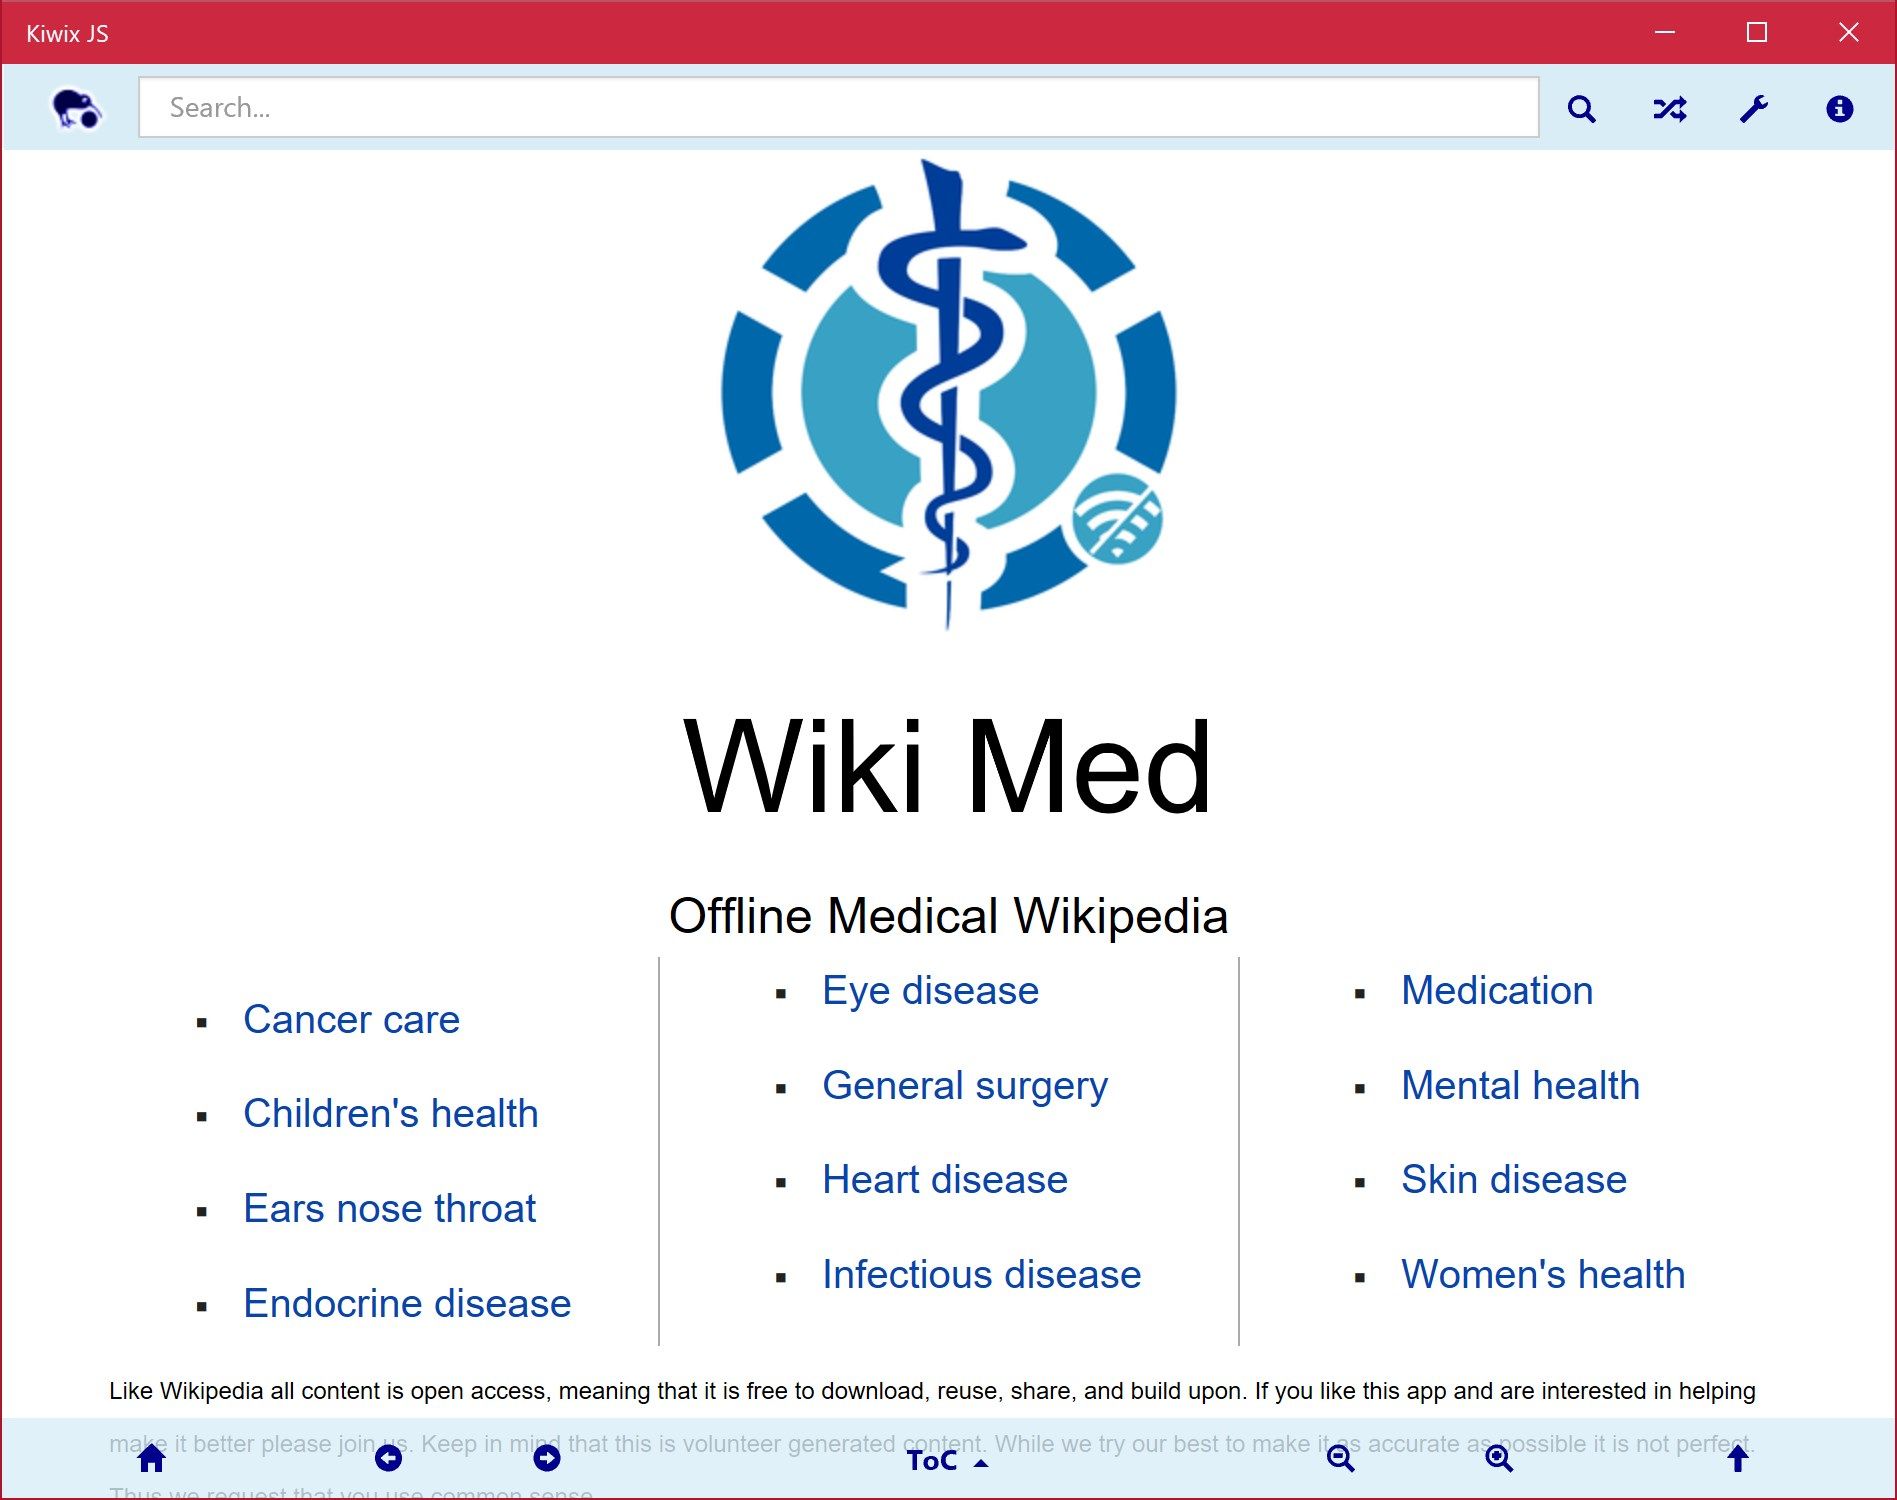 Wiki Med home page